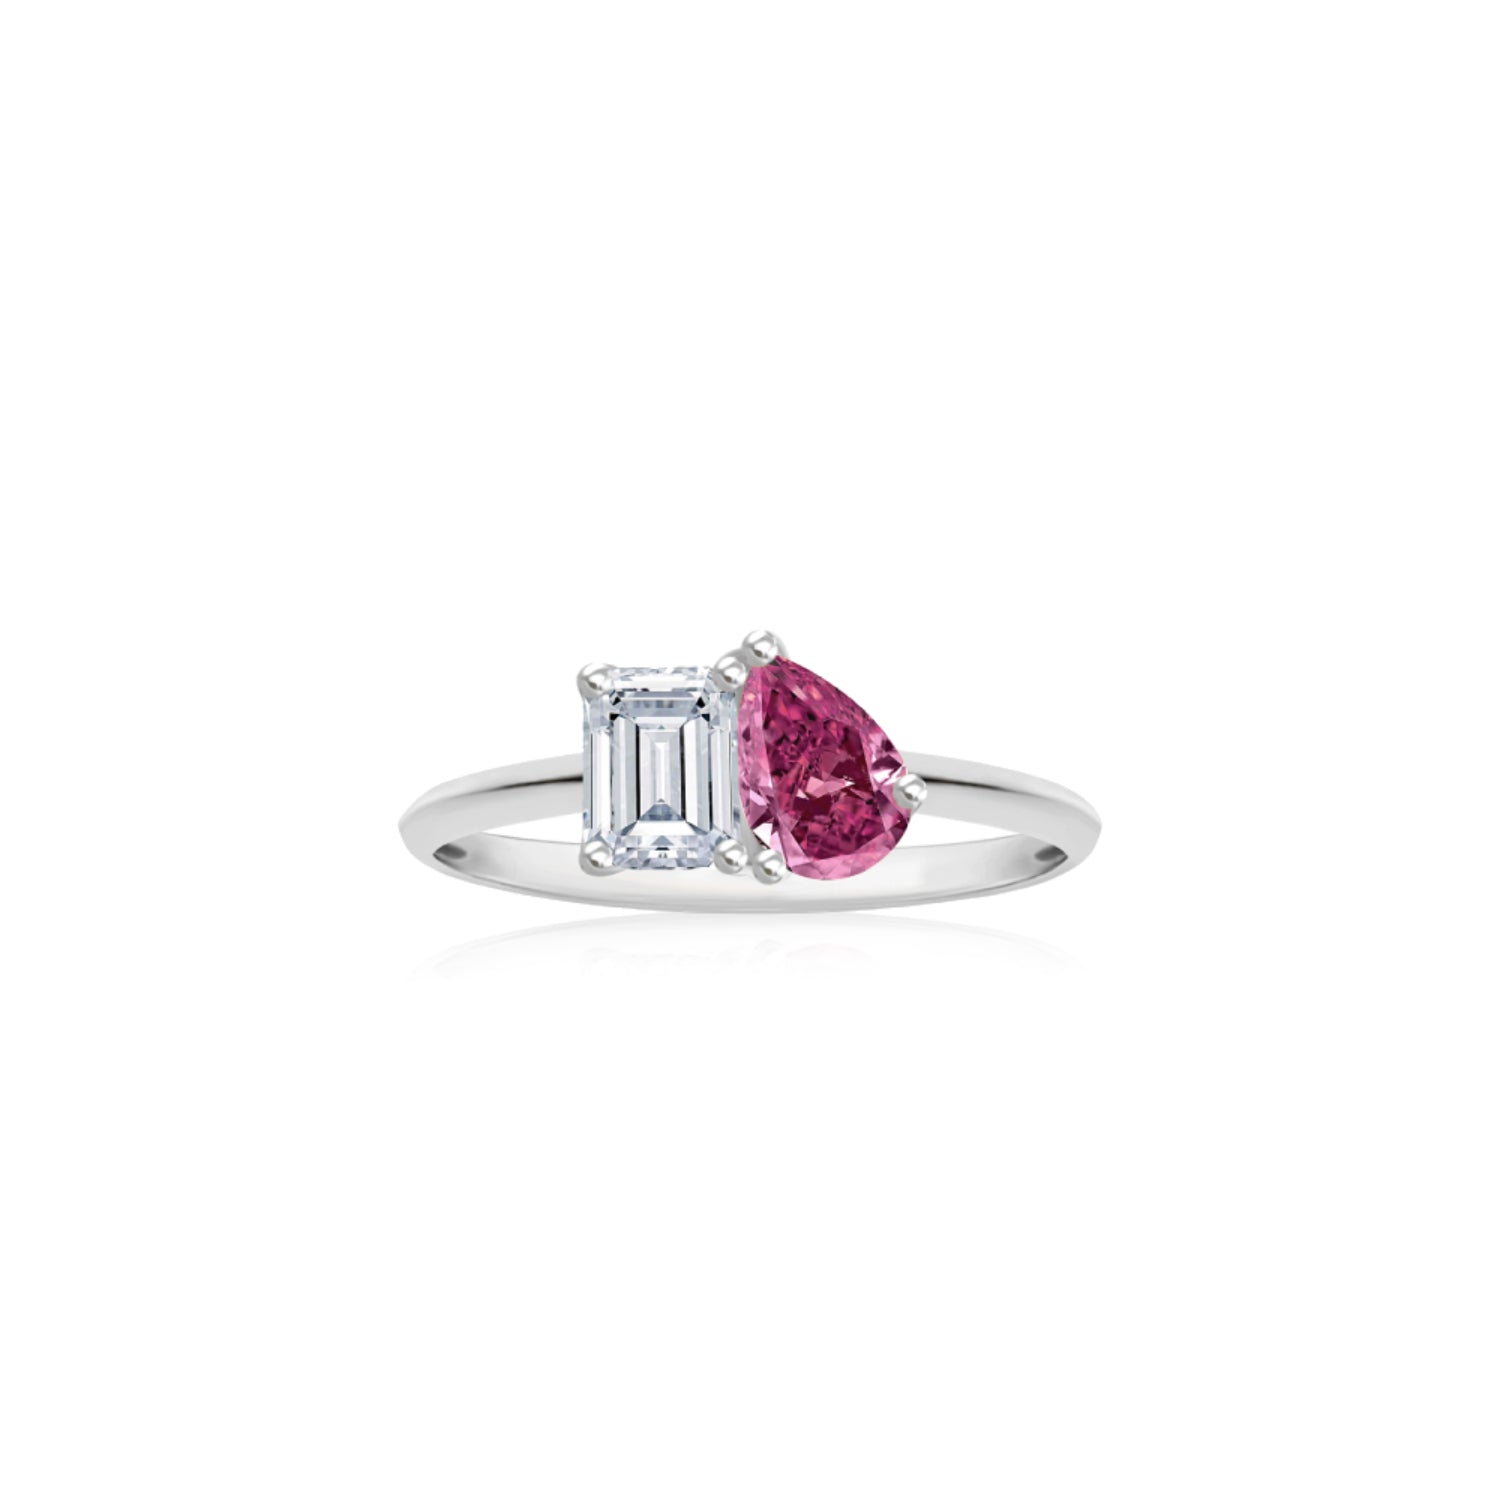 Diamond and Ruby Toi et Moi Engagement Ring in White Gold